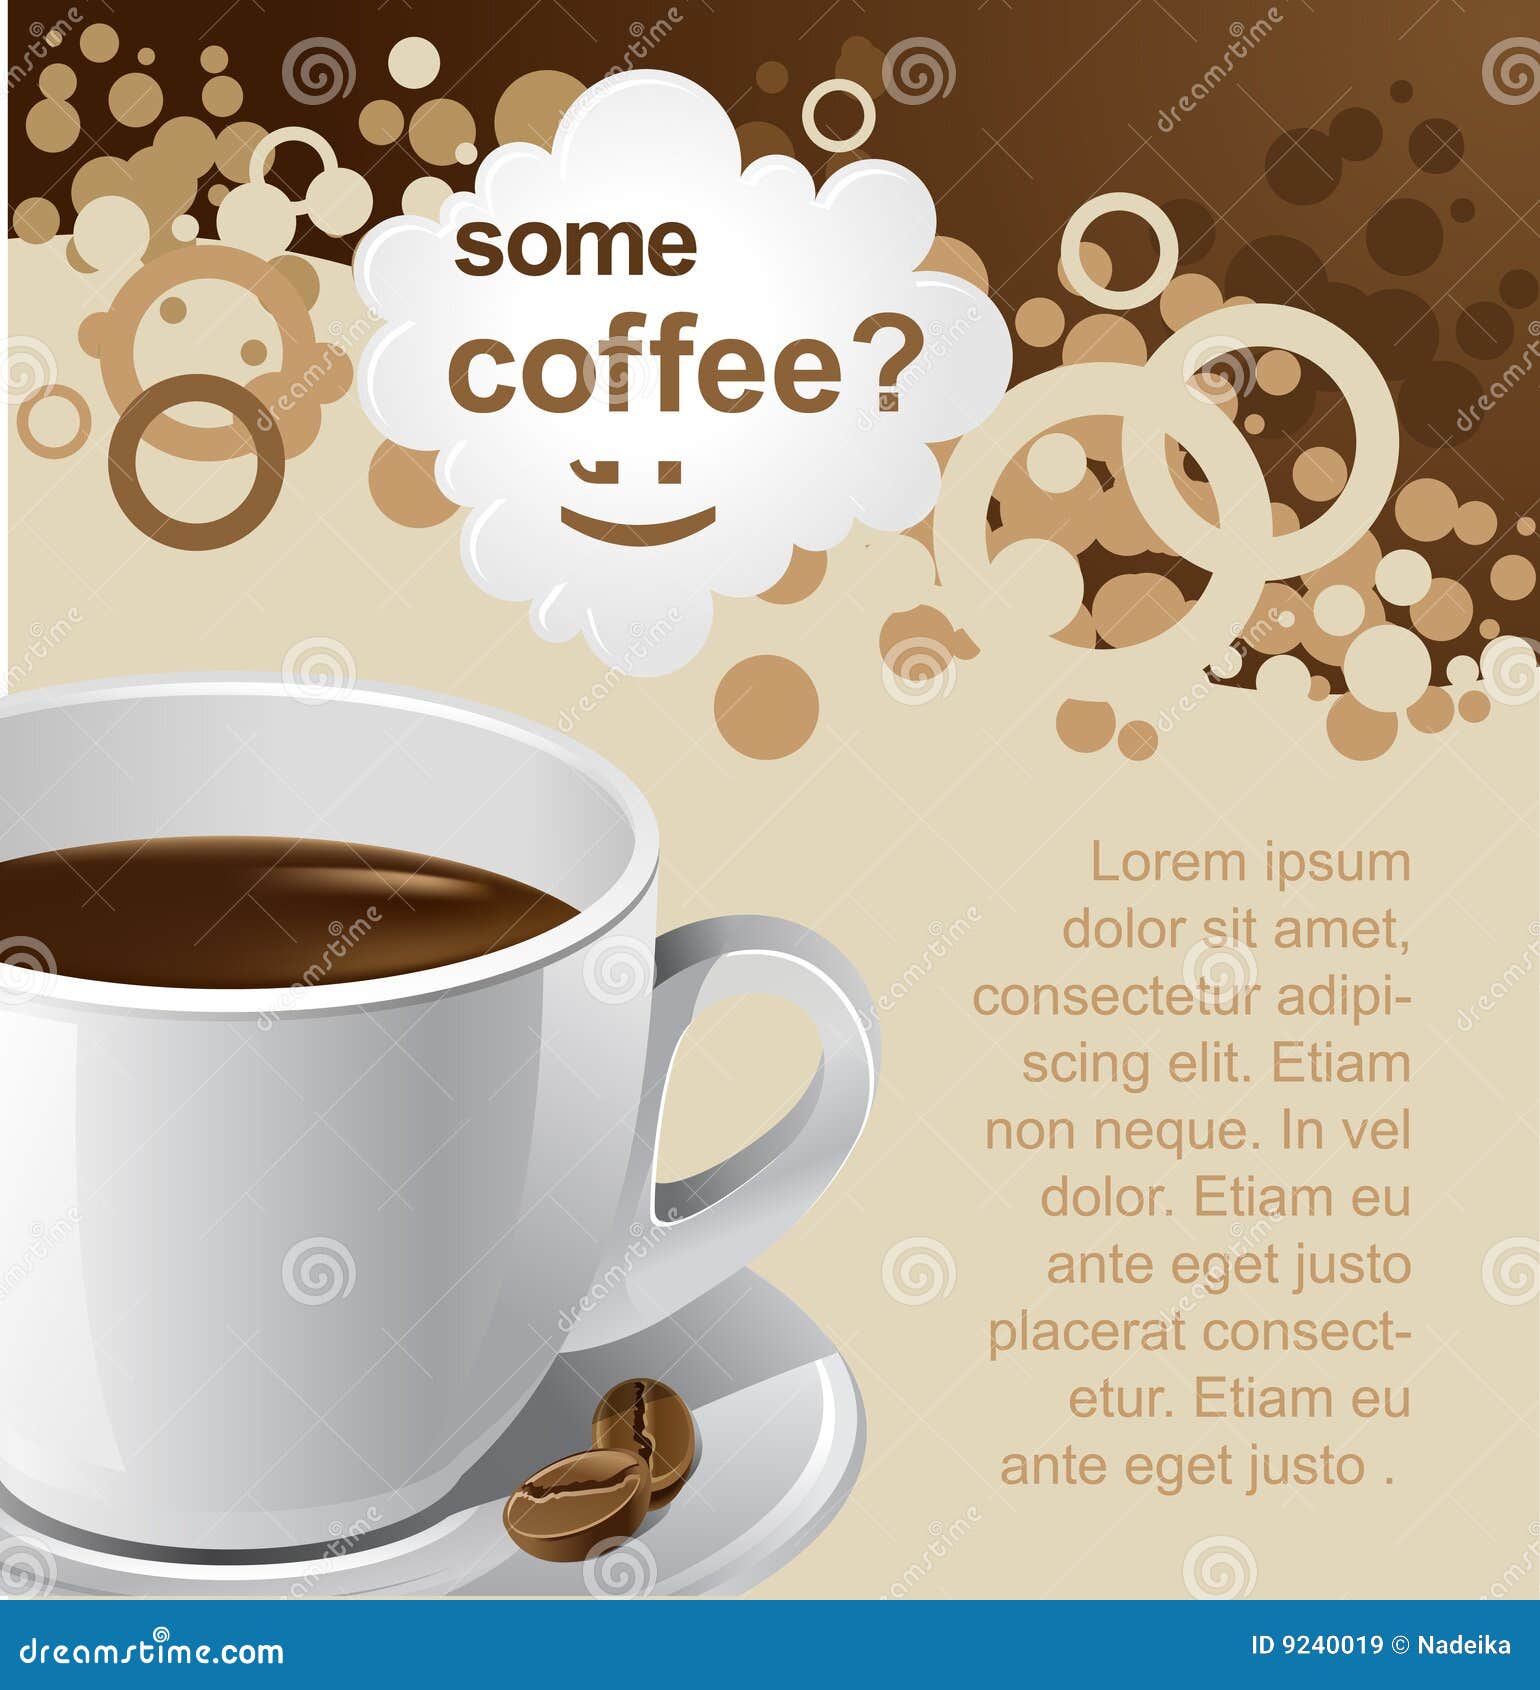 Coffee Promotion Royalty Free Stock Images - Image: 9240019